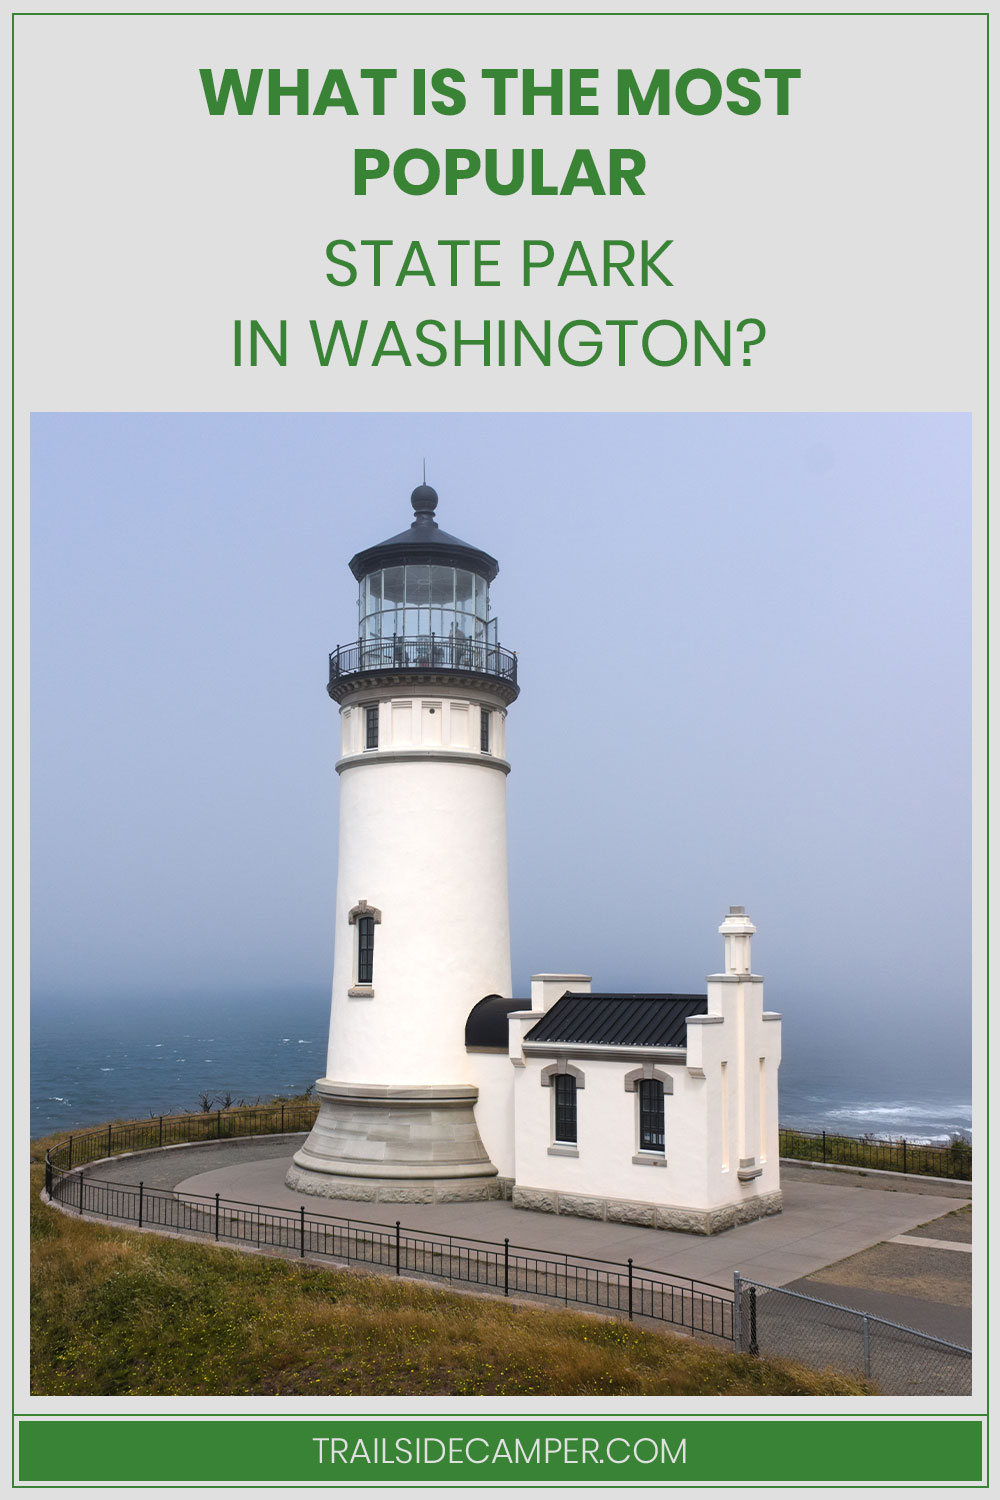 North Head Lighthouse - What is The Most Popular State Park in Washington?